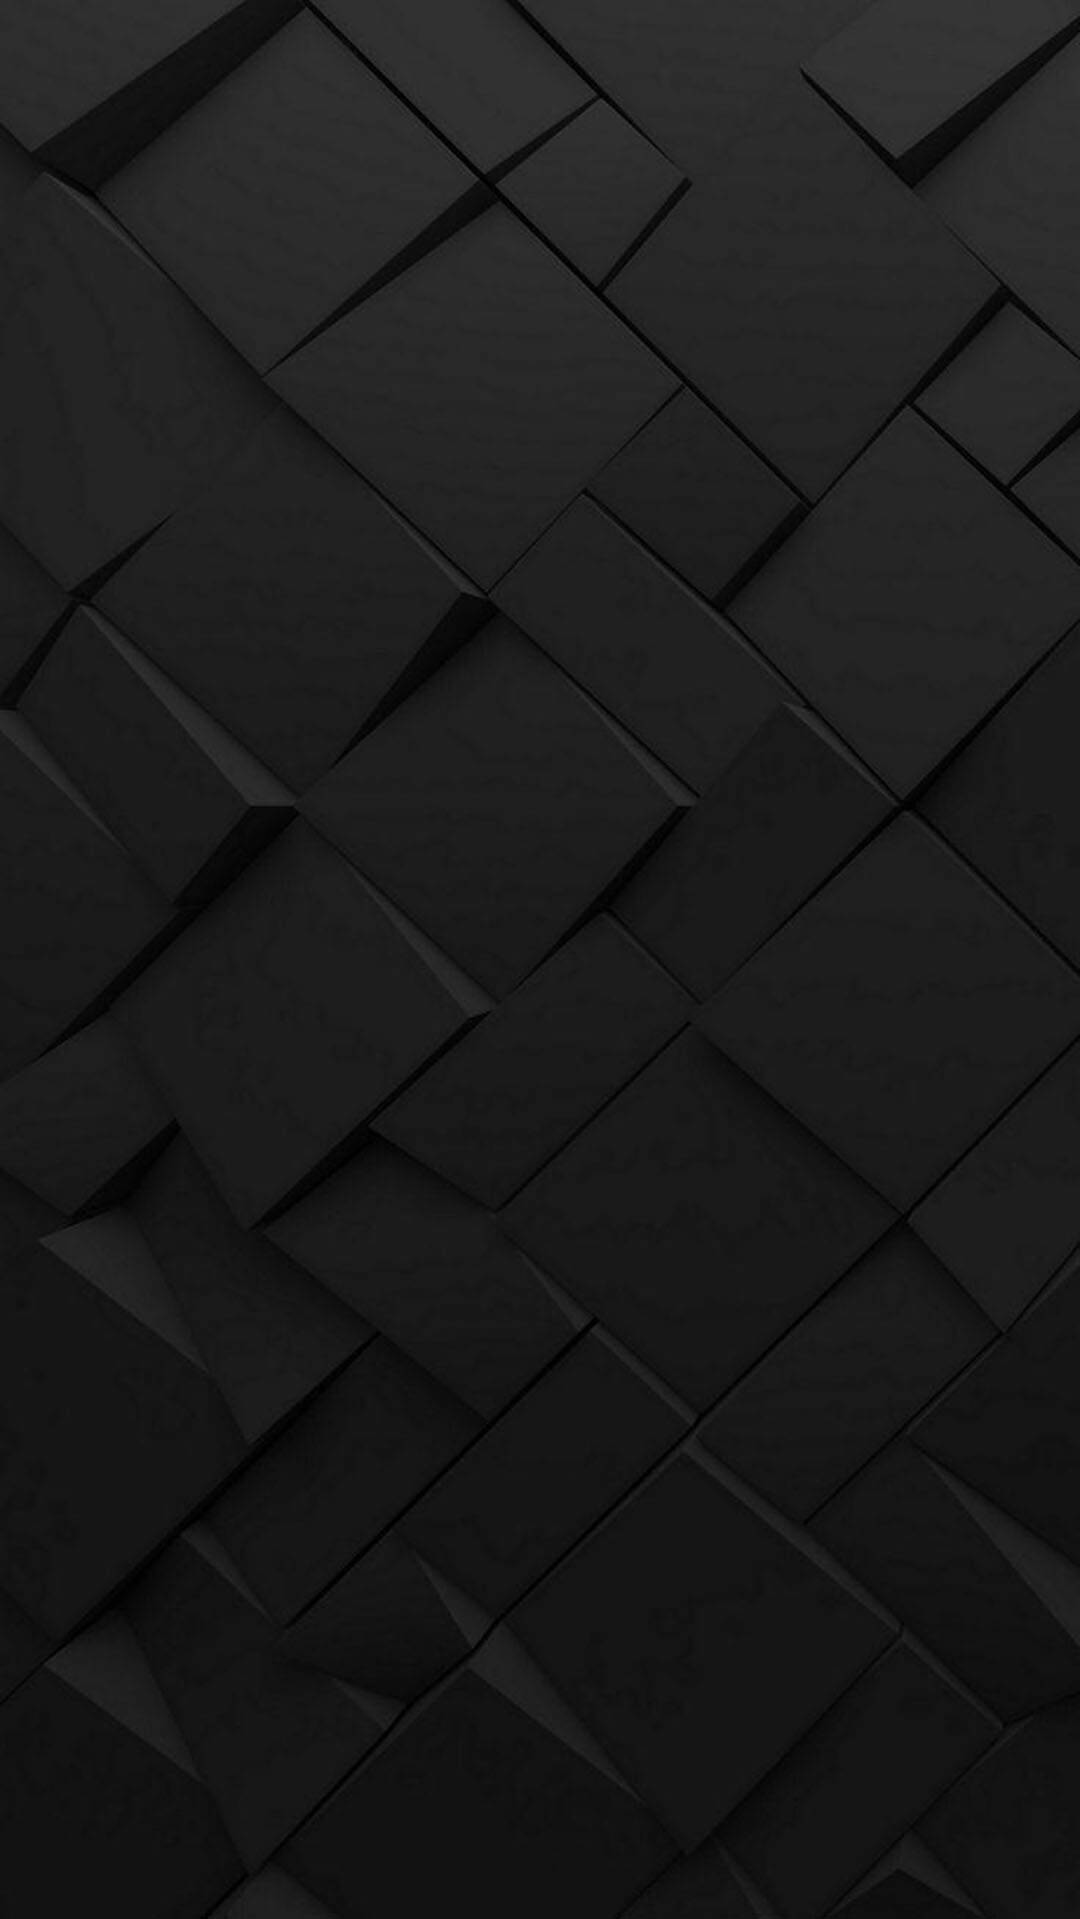 Dark Android 3d Abstract Cube Pattern Background